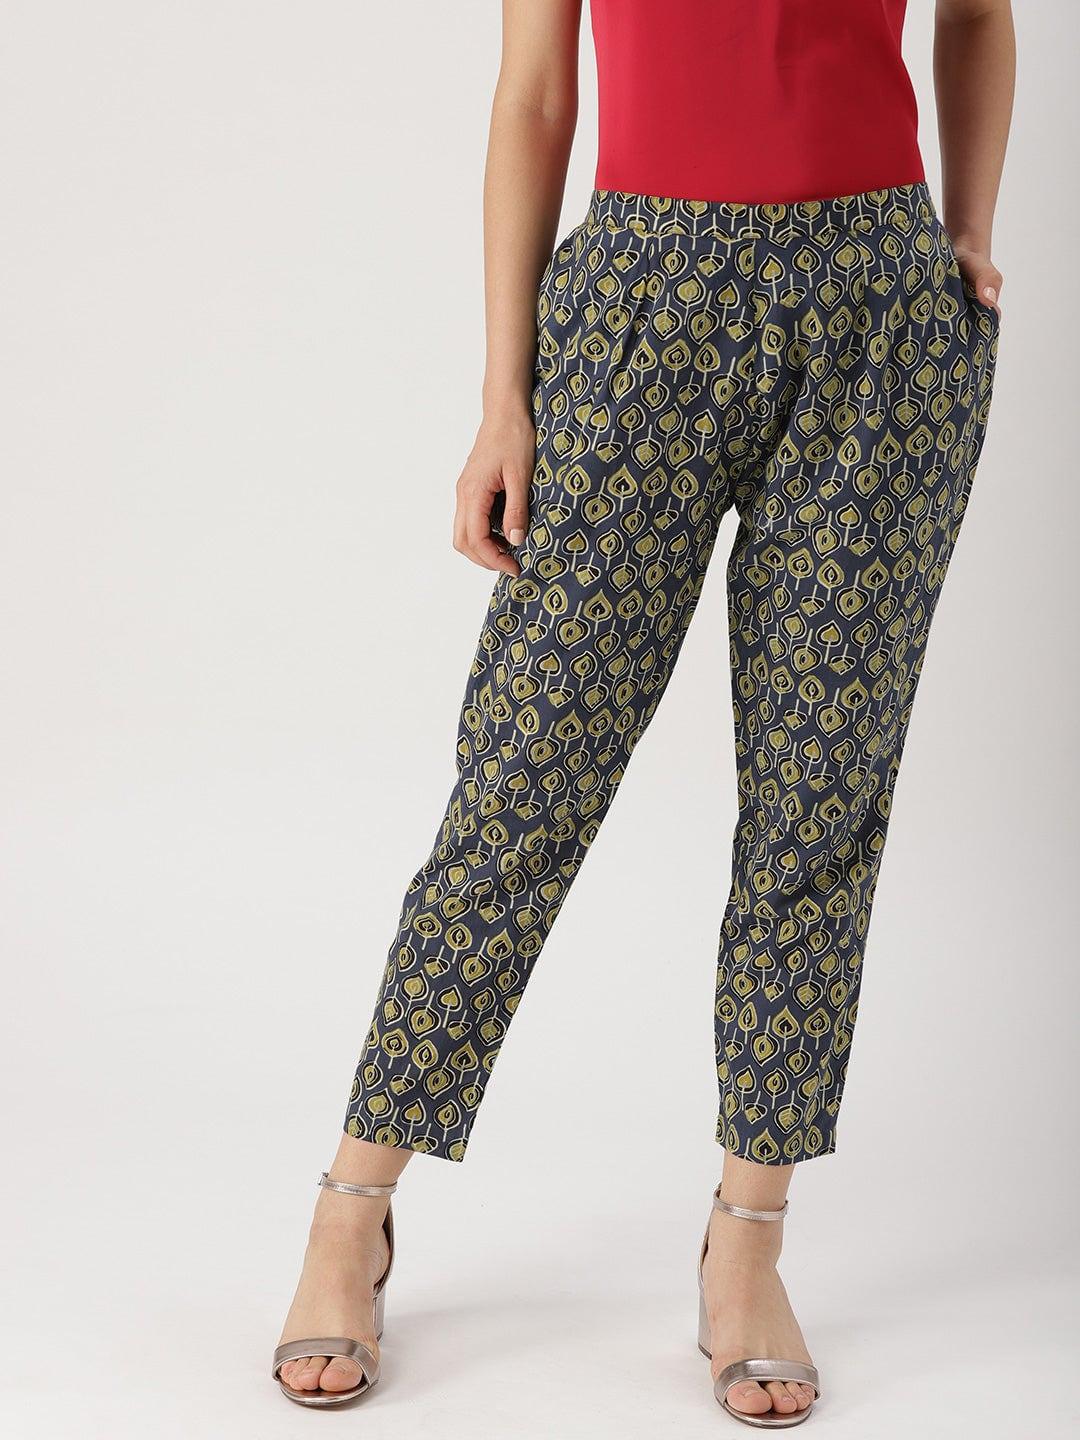 Blue Printed Cotton Trousers